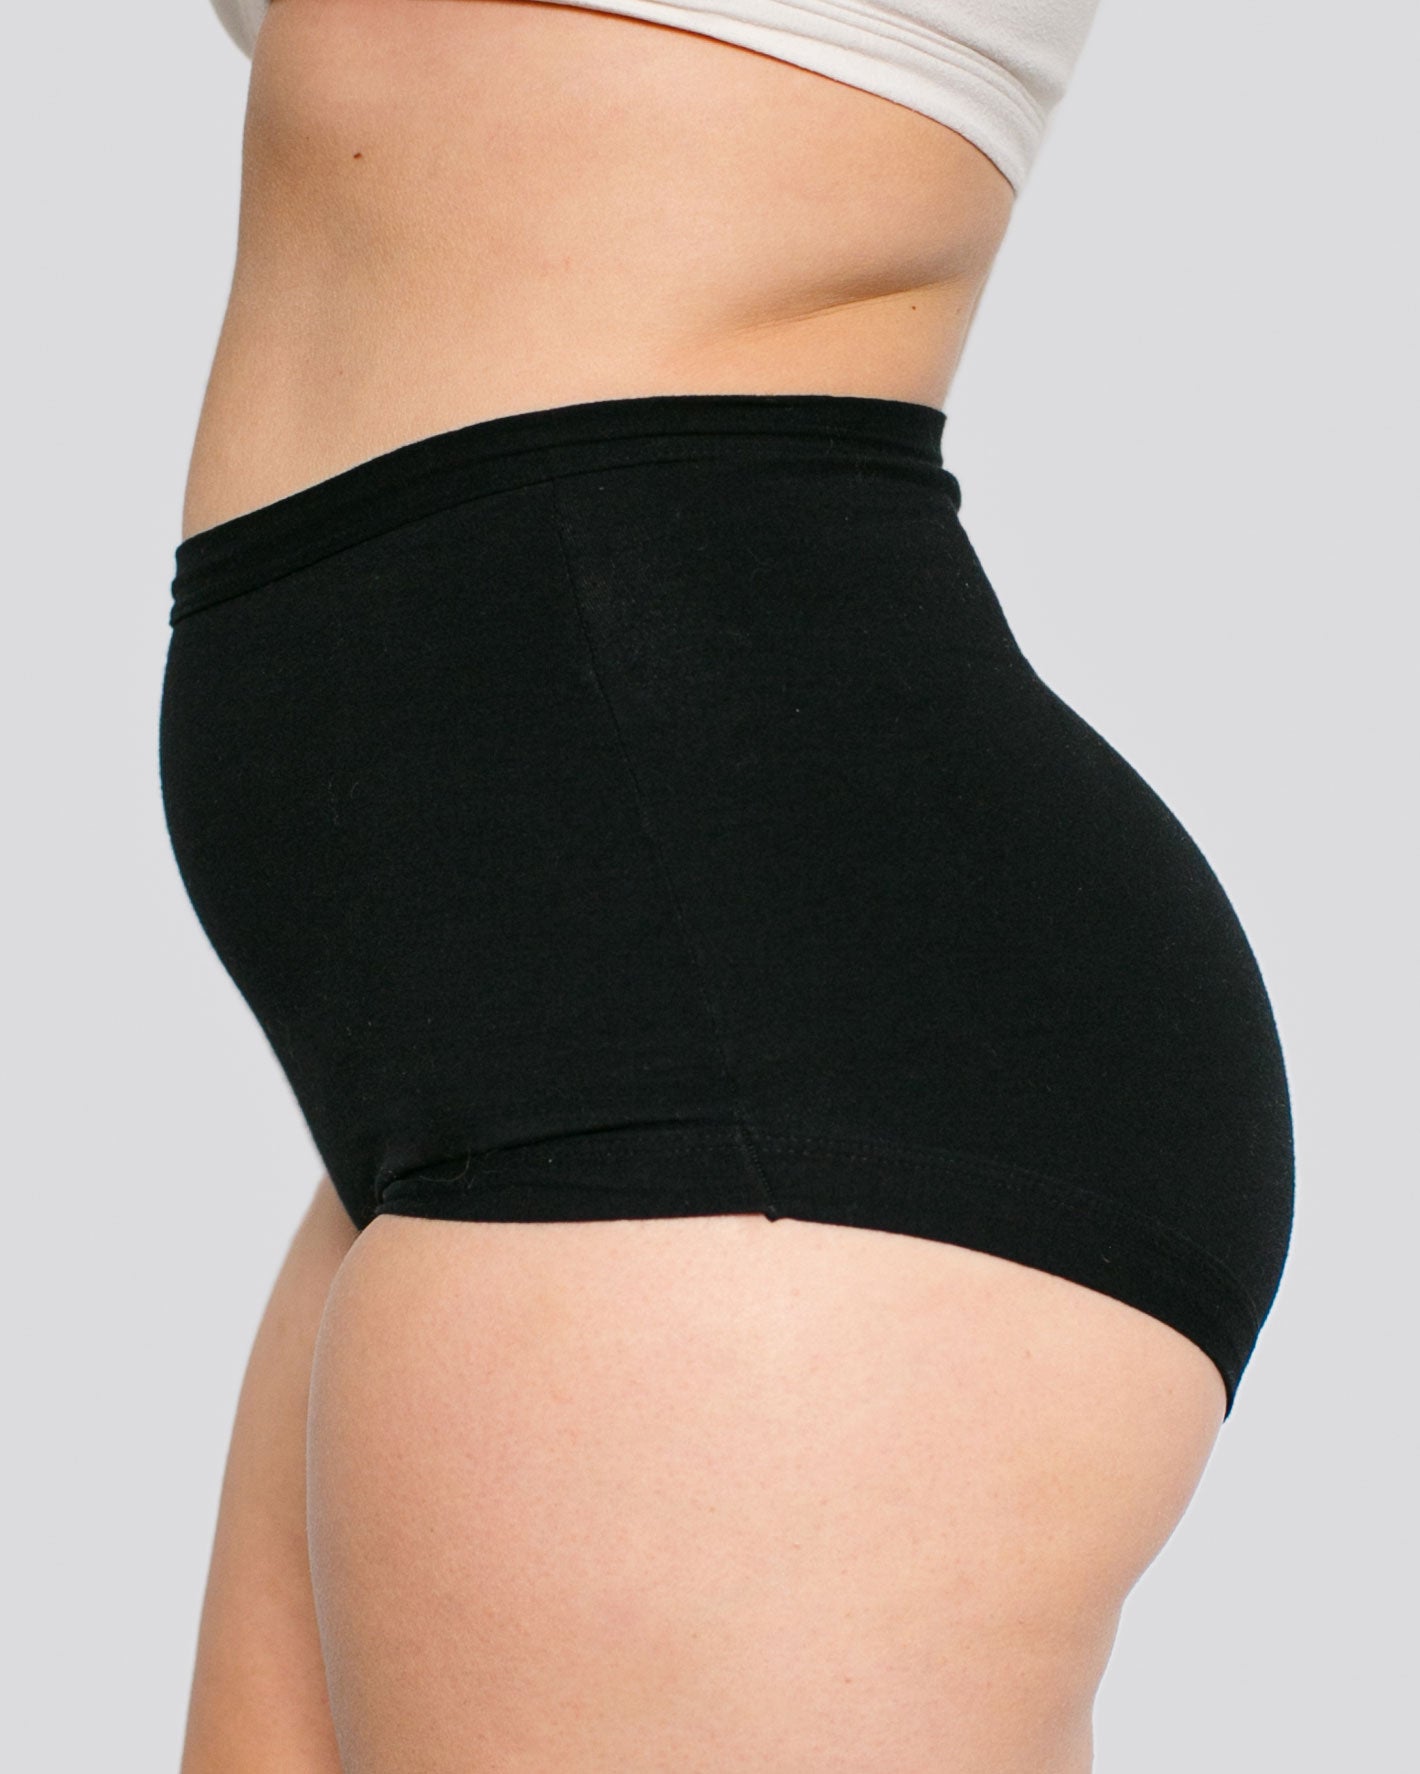 Fit photo from the side of Thunderpants organic cotton Sky Rise style underwear in Plain Black on a model.